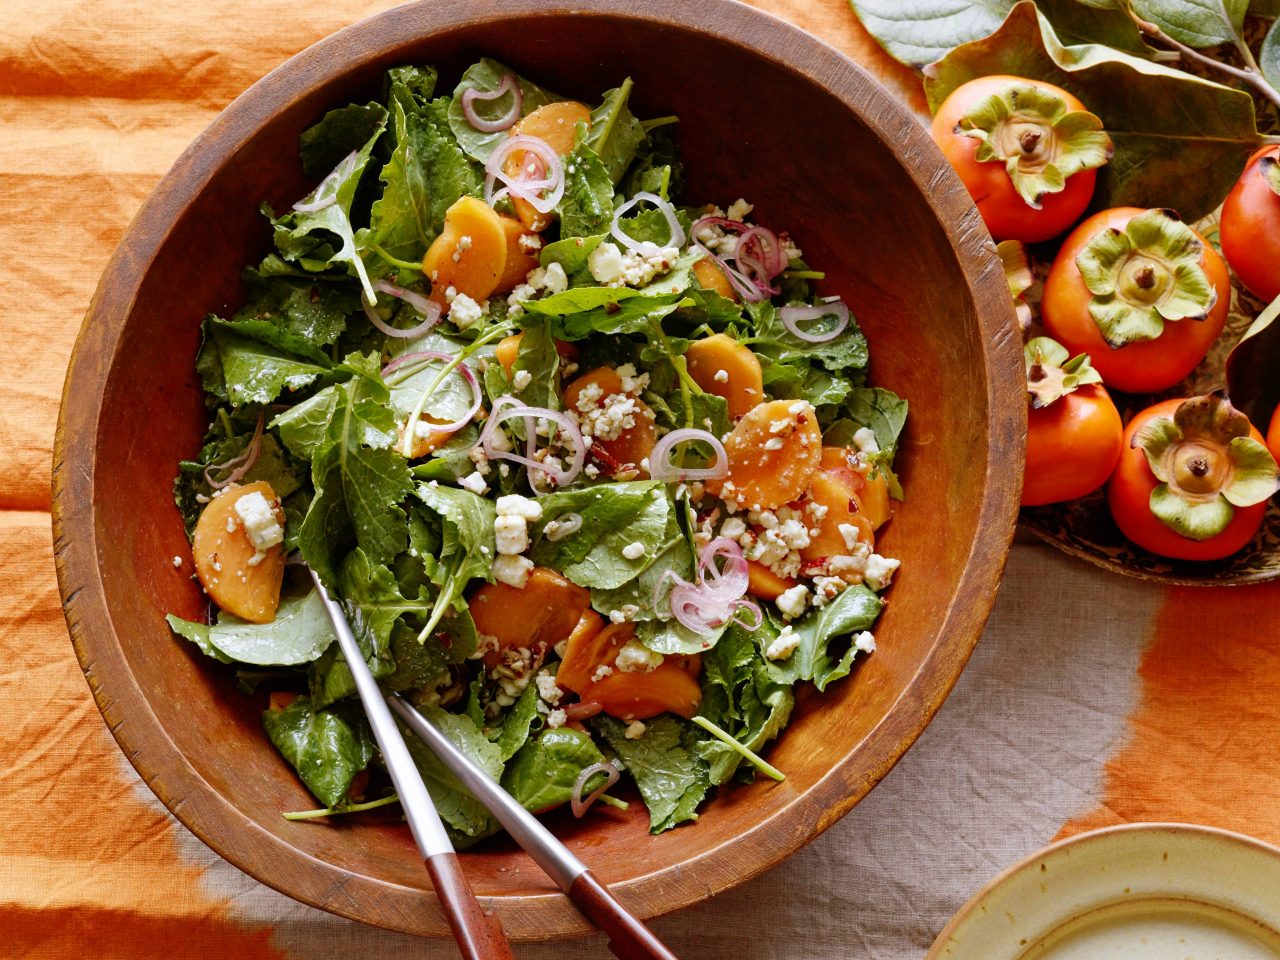 Food Network Kitchen's Kale and Persimmon Salad with Pecan Vinaigrette